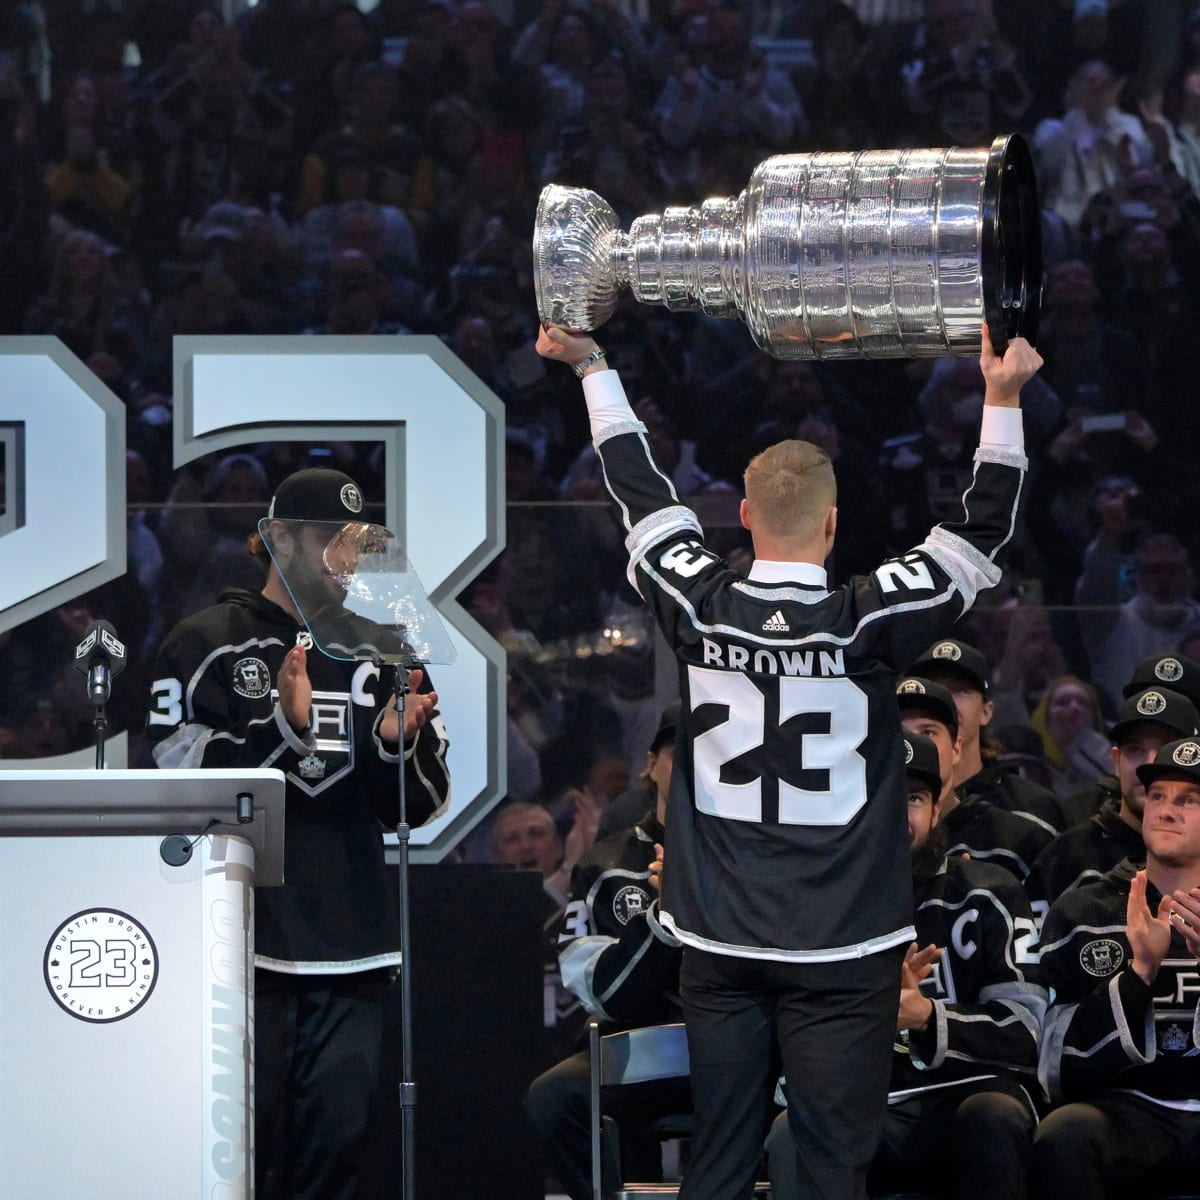 Kings' Dustin Brown Deserving of Jersey Retirement and Statue